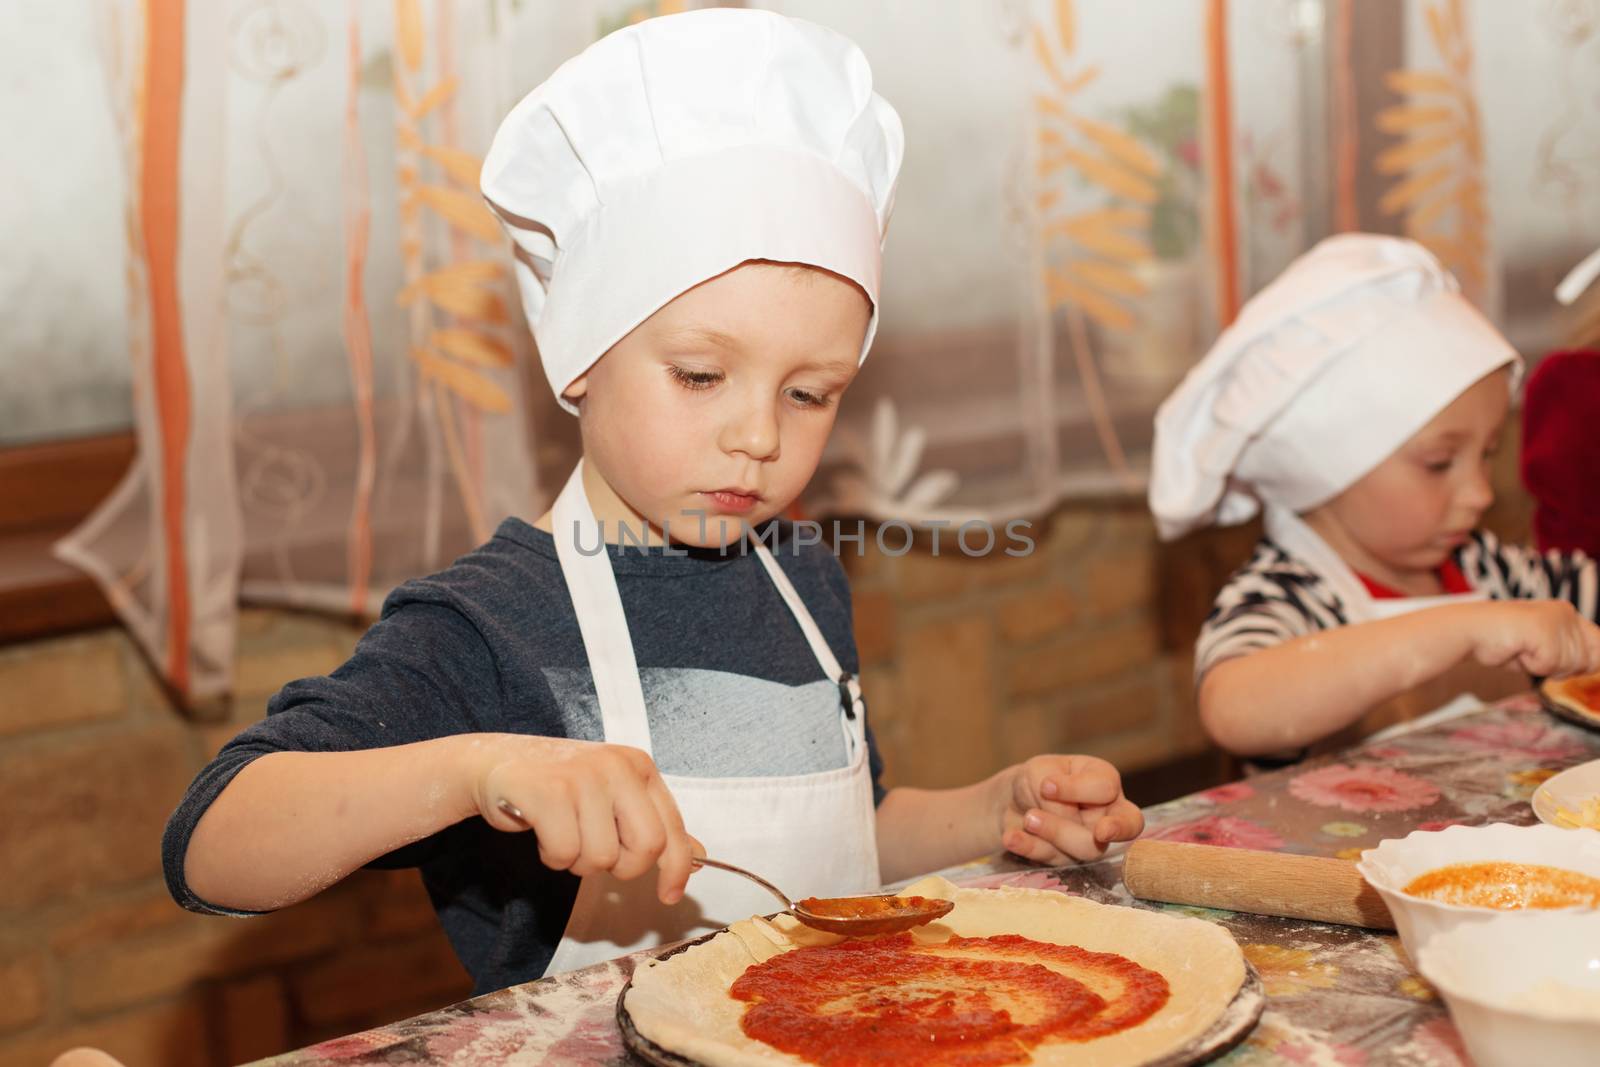 Little cook. Children make pizza. Master class for children on cooking Italian pizza. Young children learn to cook a pizza. Kids preparing homemade pizza